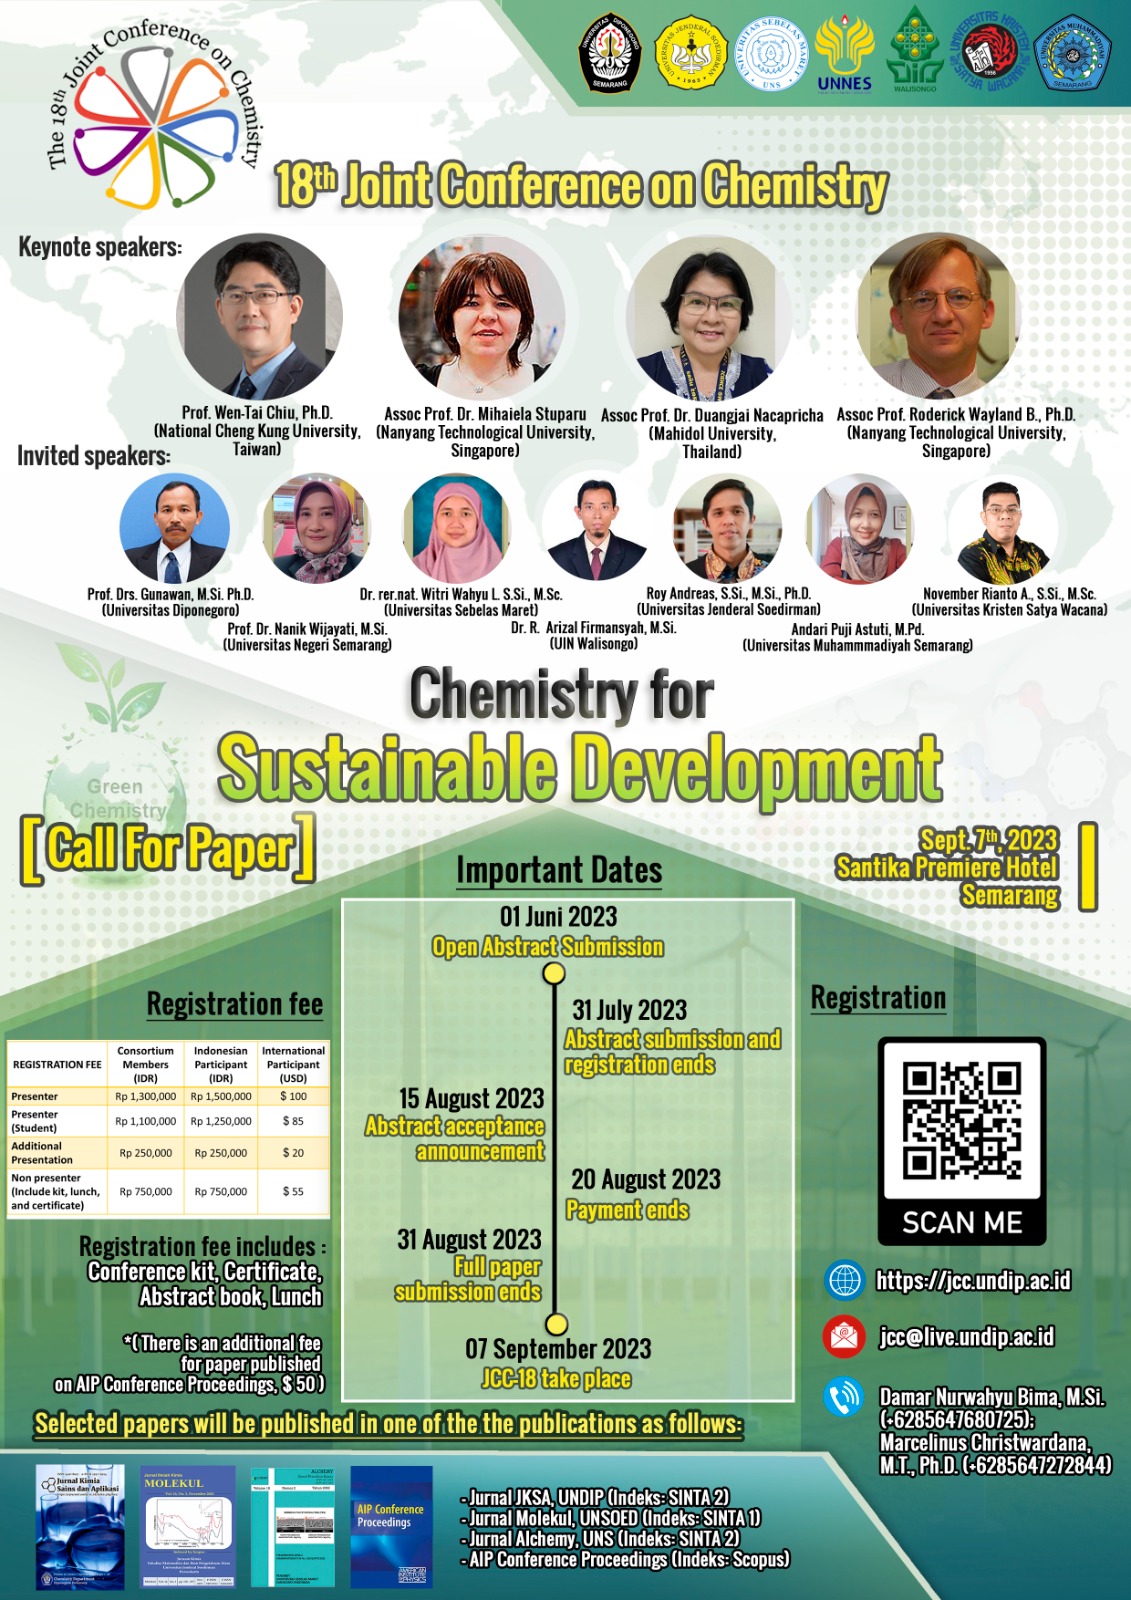 The 18th Joint Conference on Chemistry